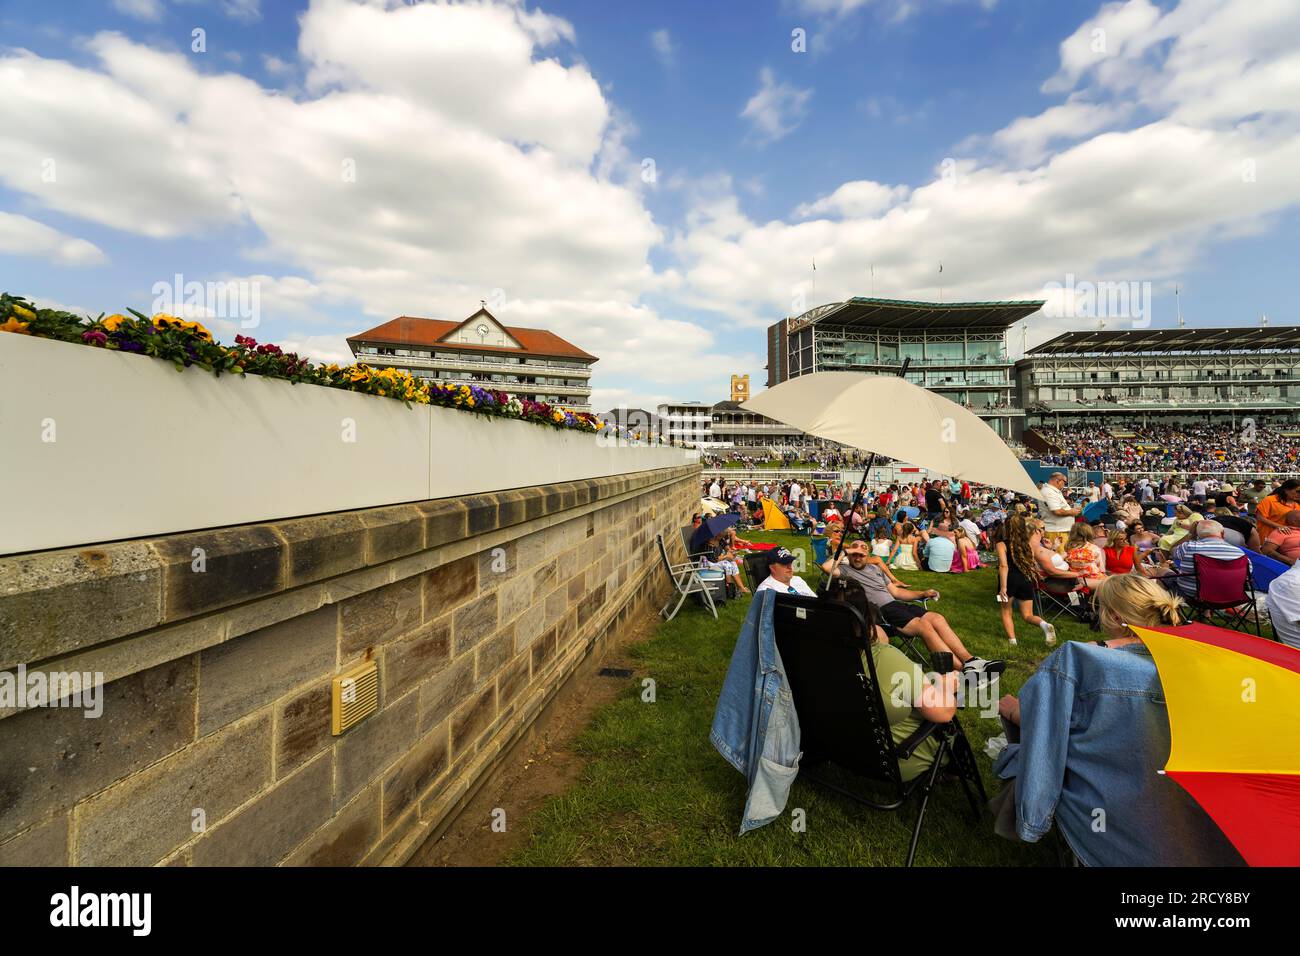 Horse race in York, England. People sitting in the lawn seats to see the horse races, picnic, drink, eat, bet and enjoy time with friends and family. Stock Photo